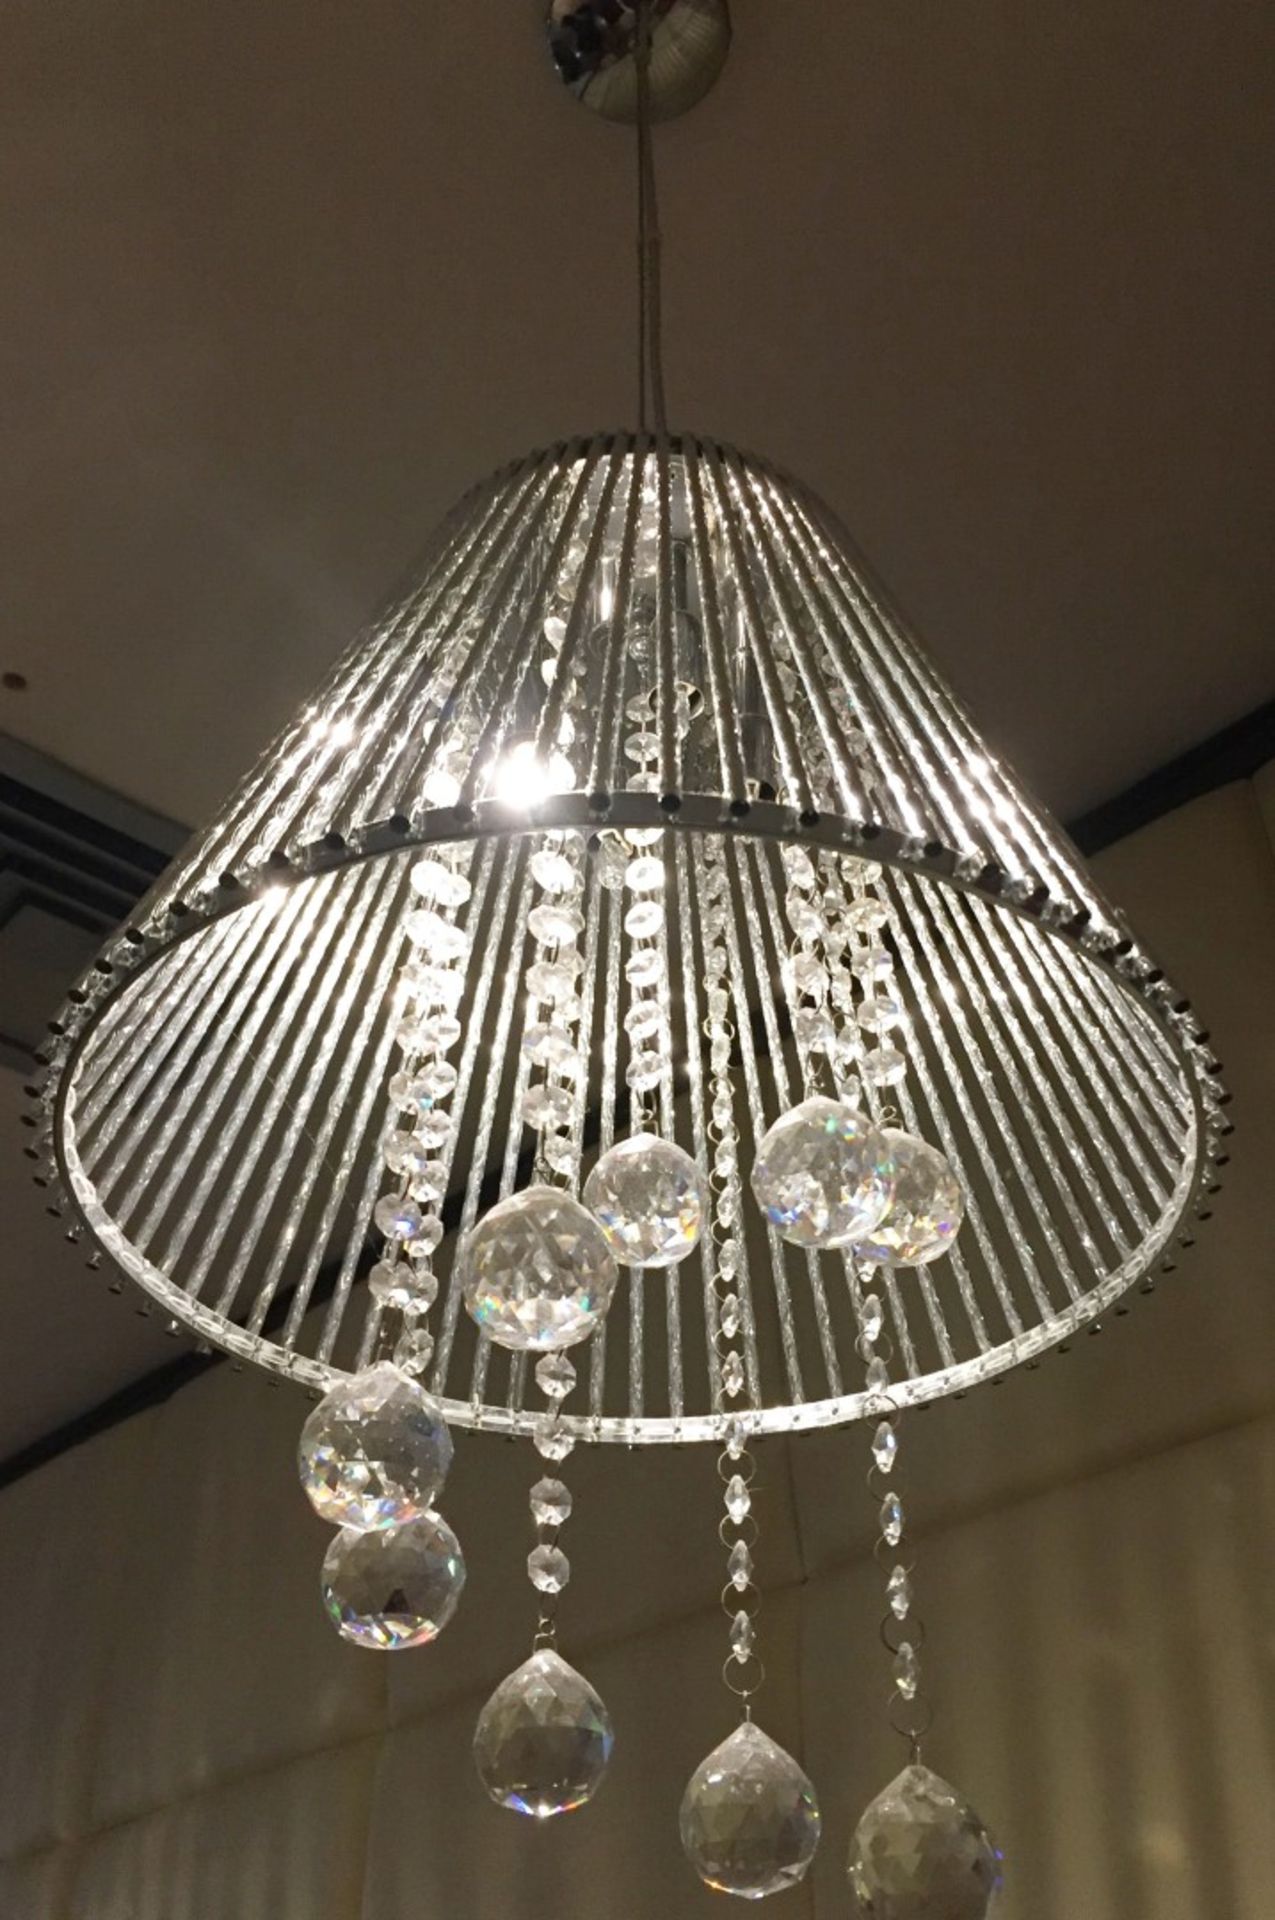 2 x Contemporary Pendant Ceiling Lights With Faux Crystal Droplets - CL188 - Ref GF1 - Location: